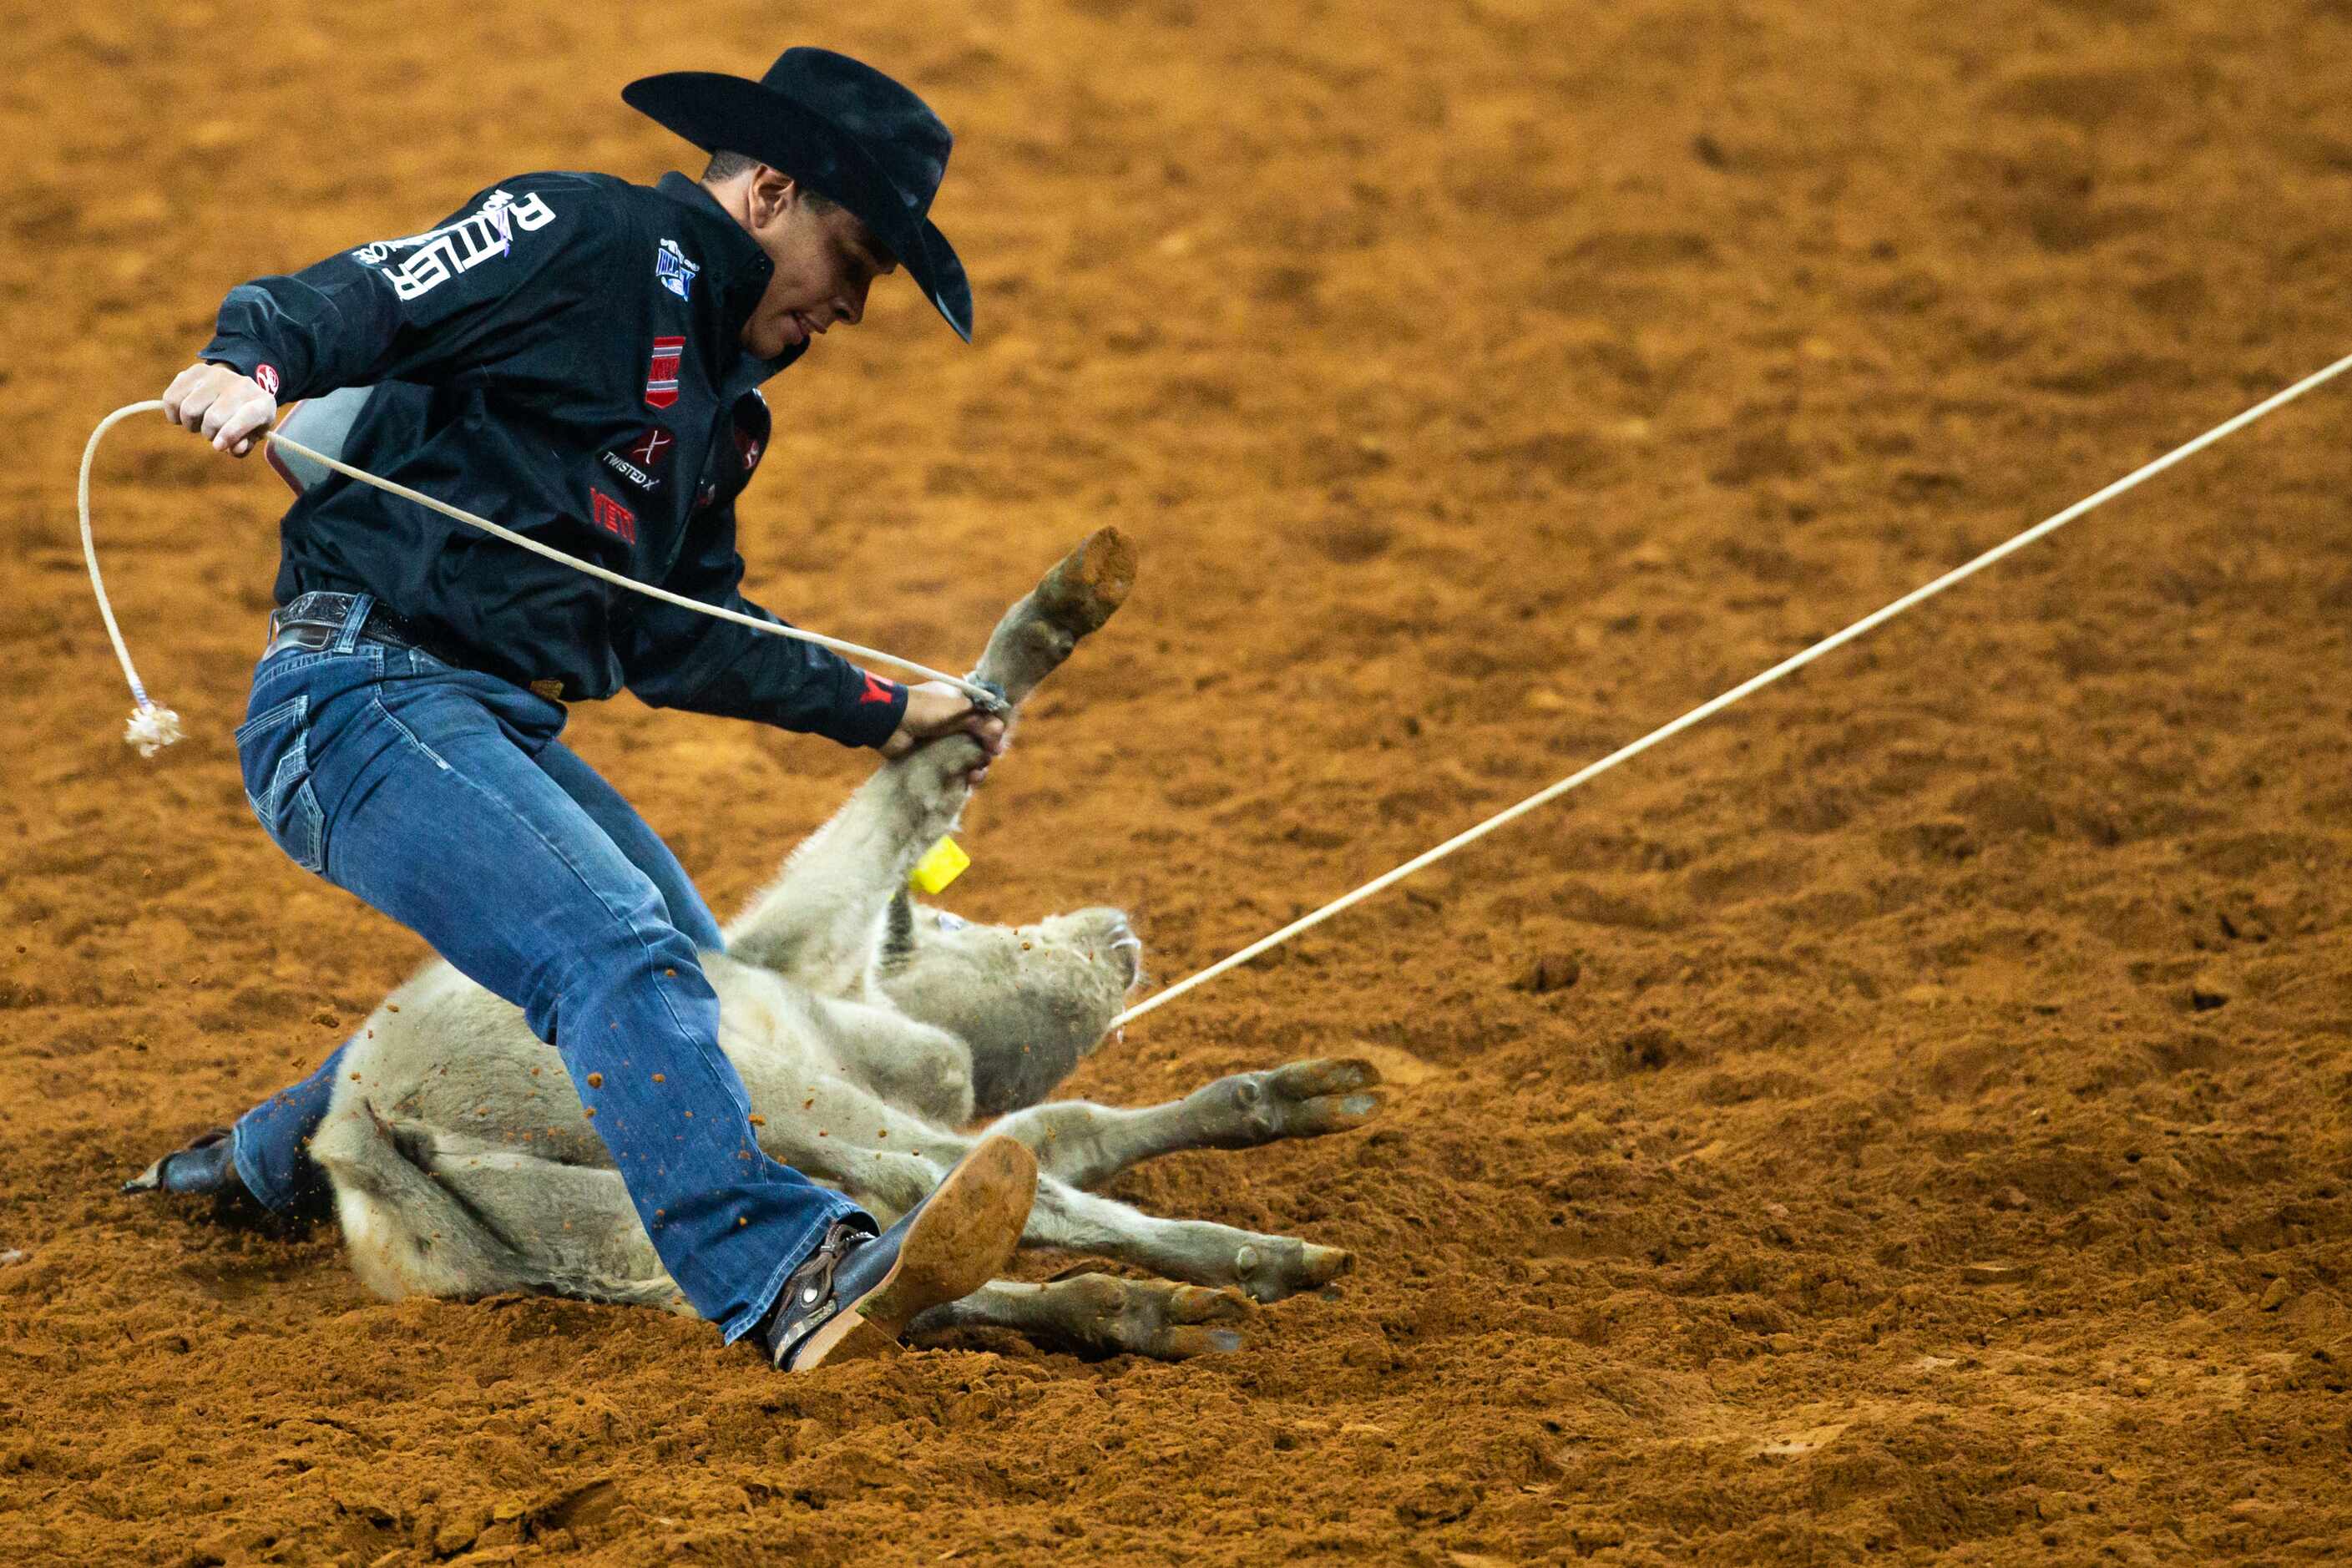 PRCA Tie Down Roping contestant Shad Mayfield earns second place in the first round of his...